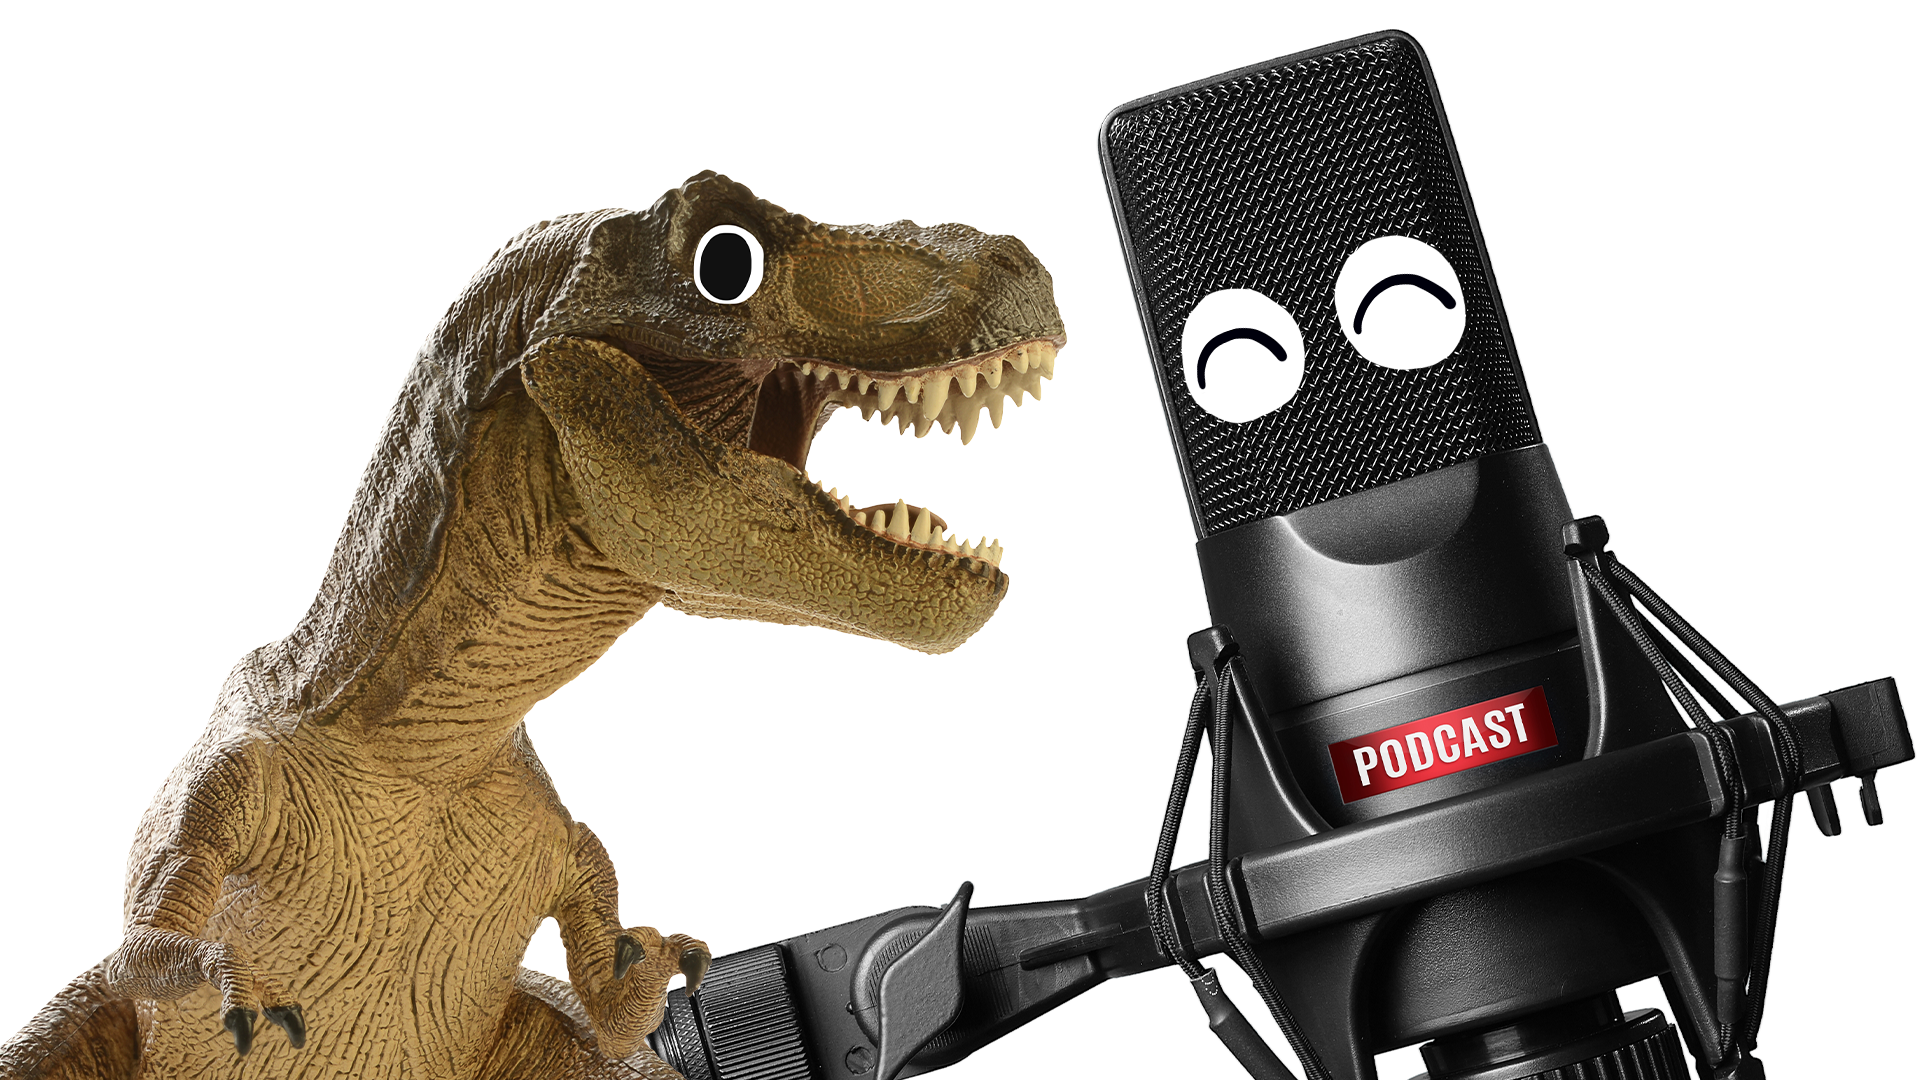 Dinosaur and microphone with smiley face on white background